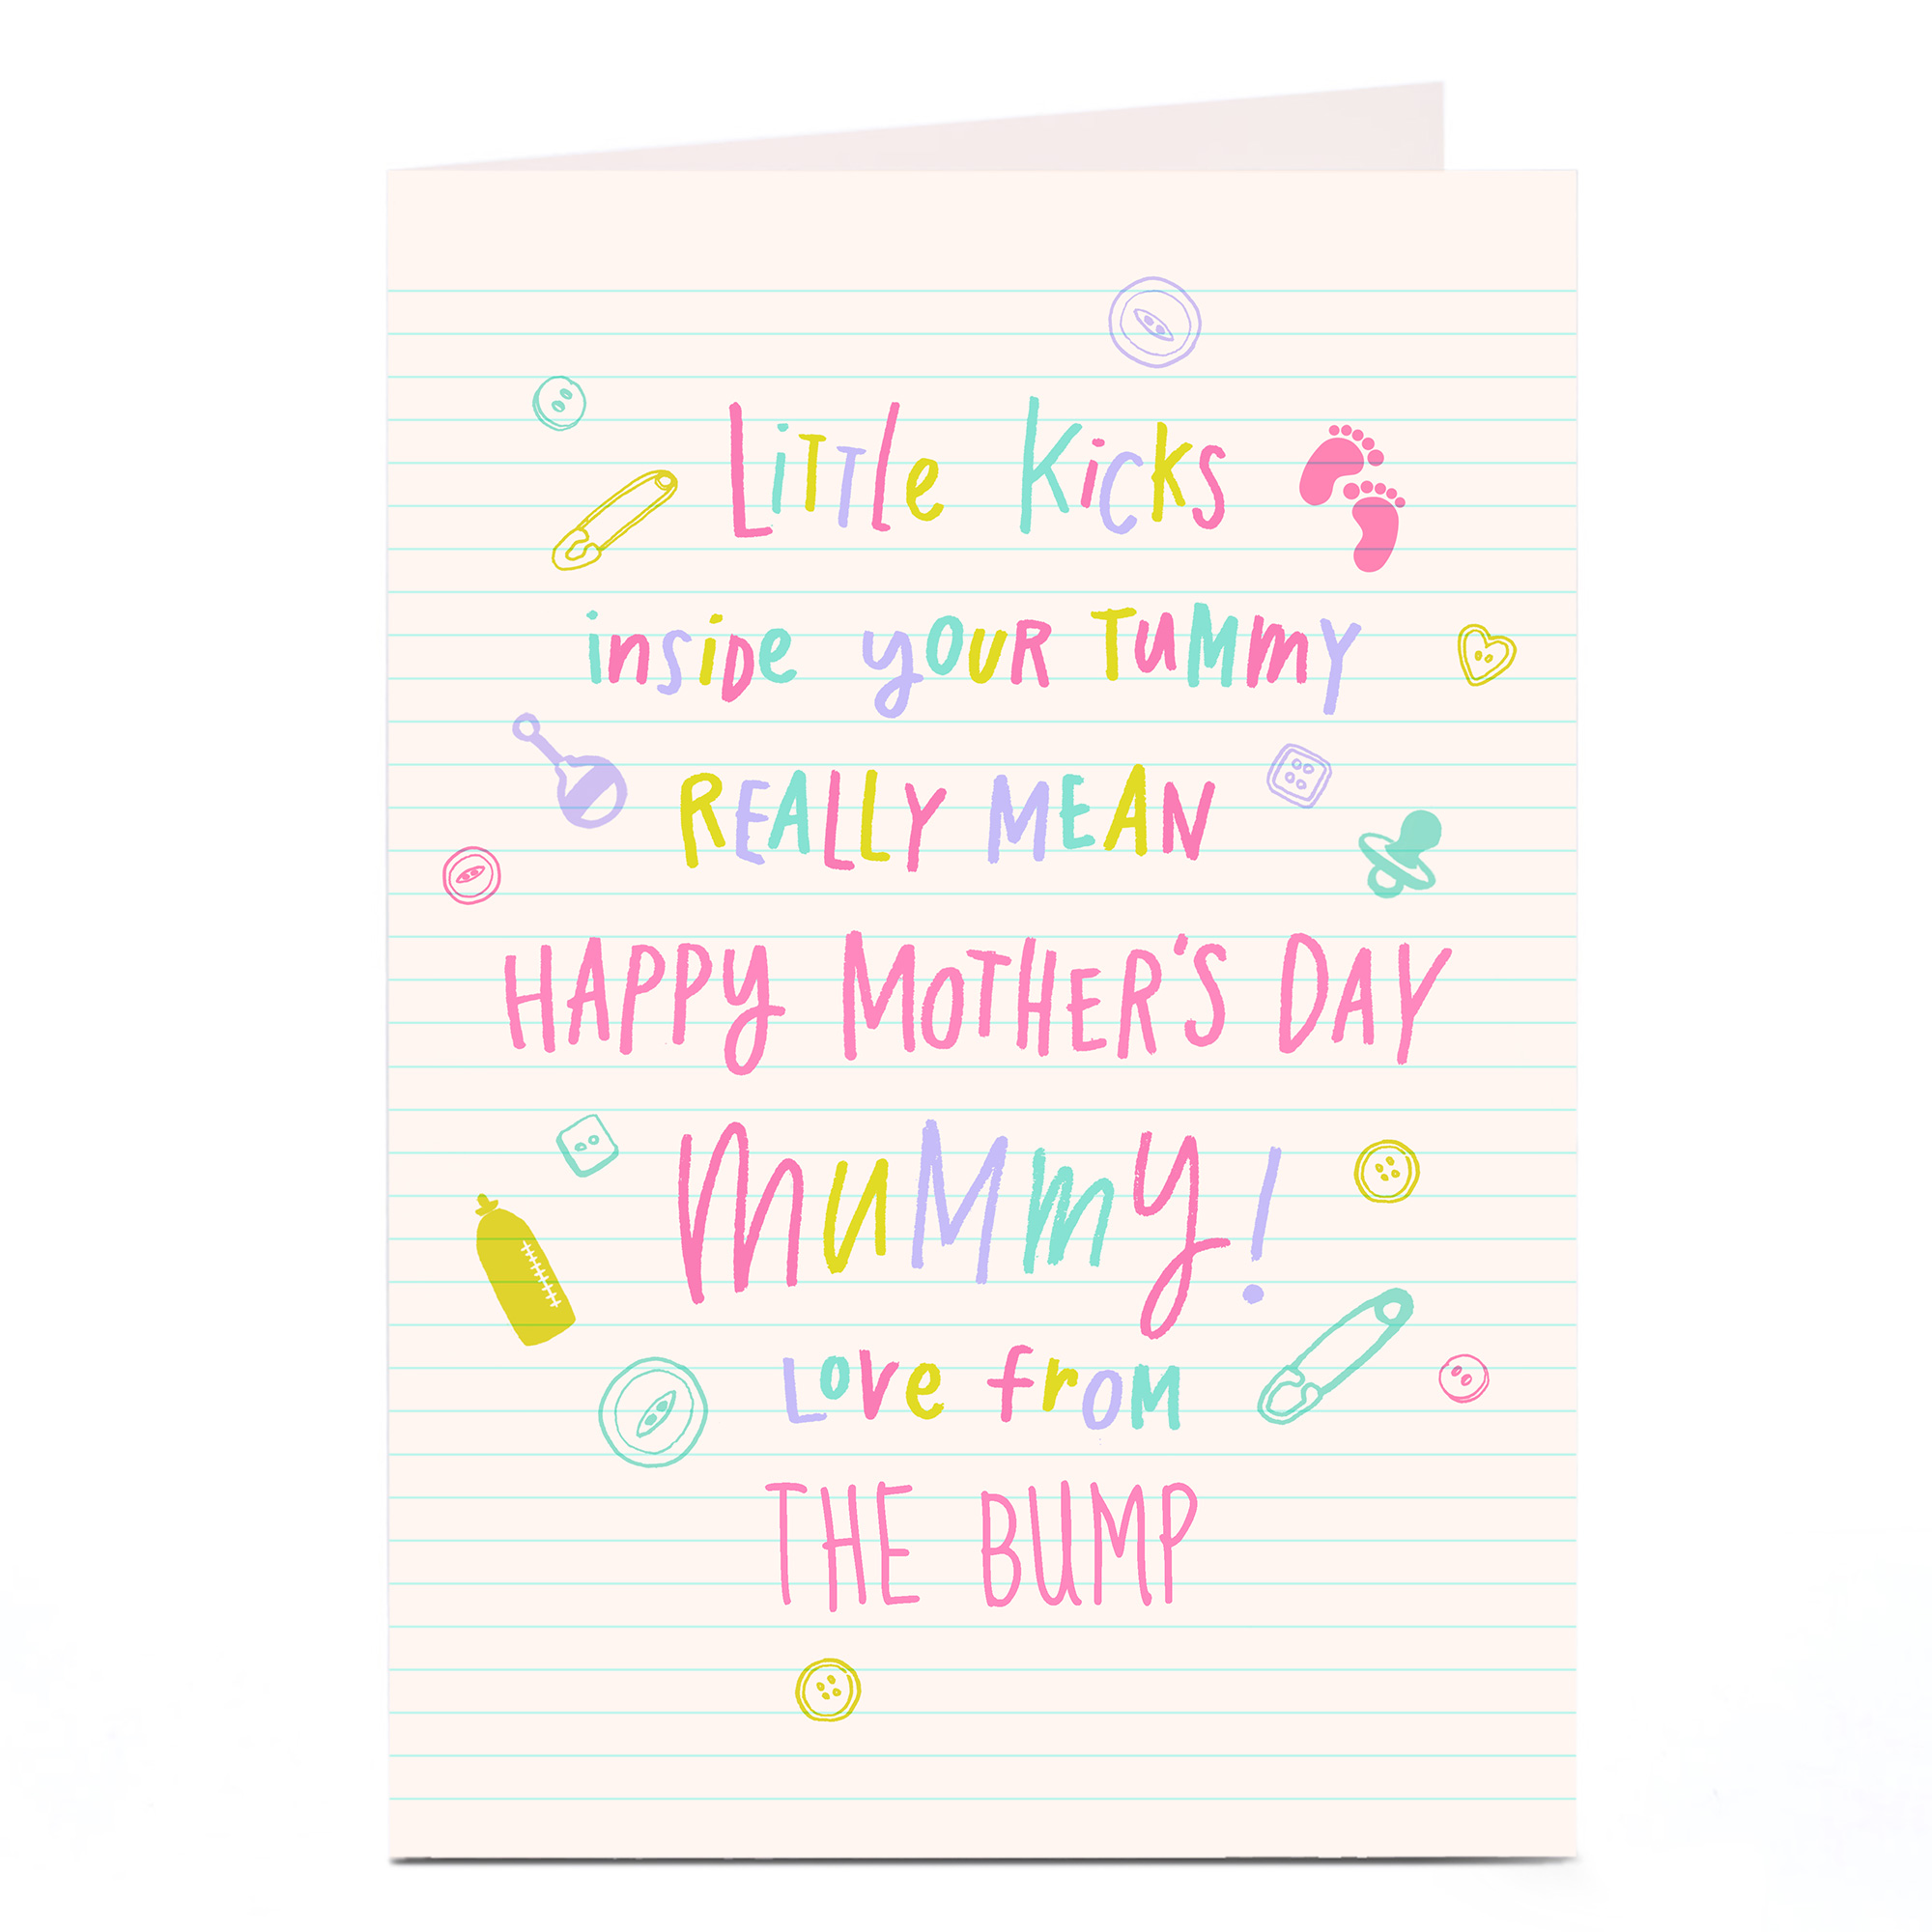 Personalised Mother's Day Card - Little Kicks Inside Your Tummy